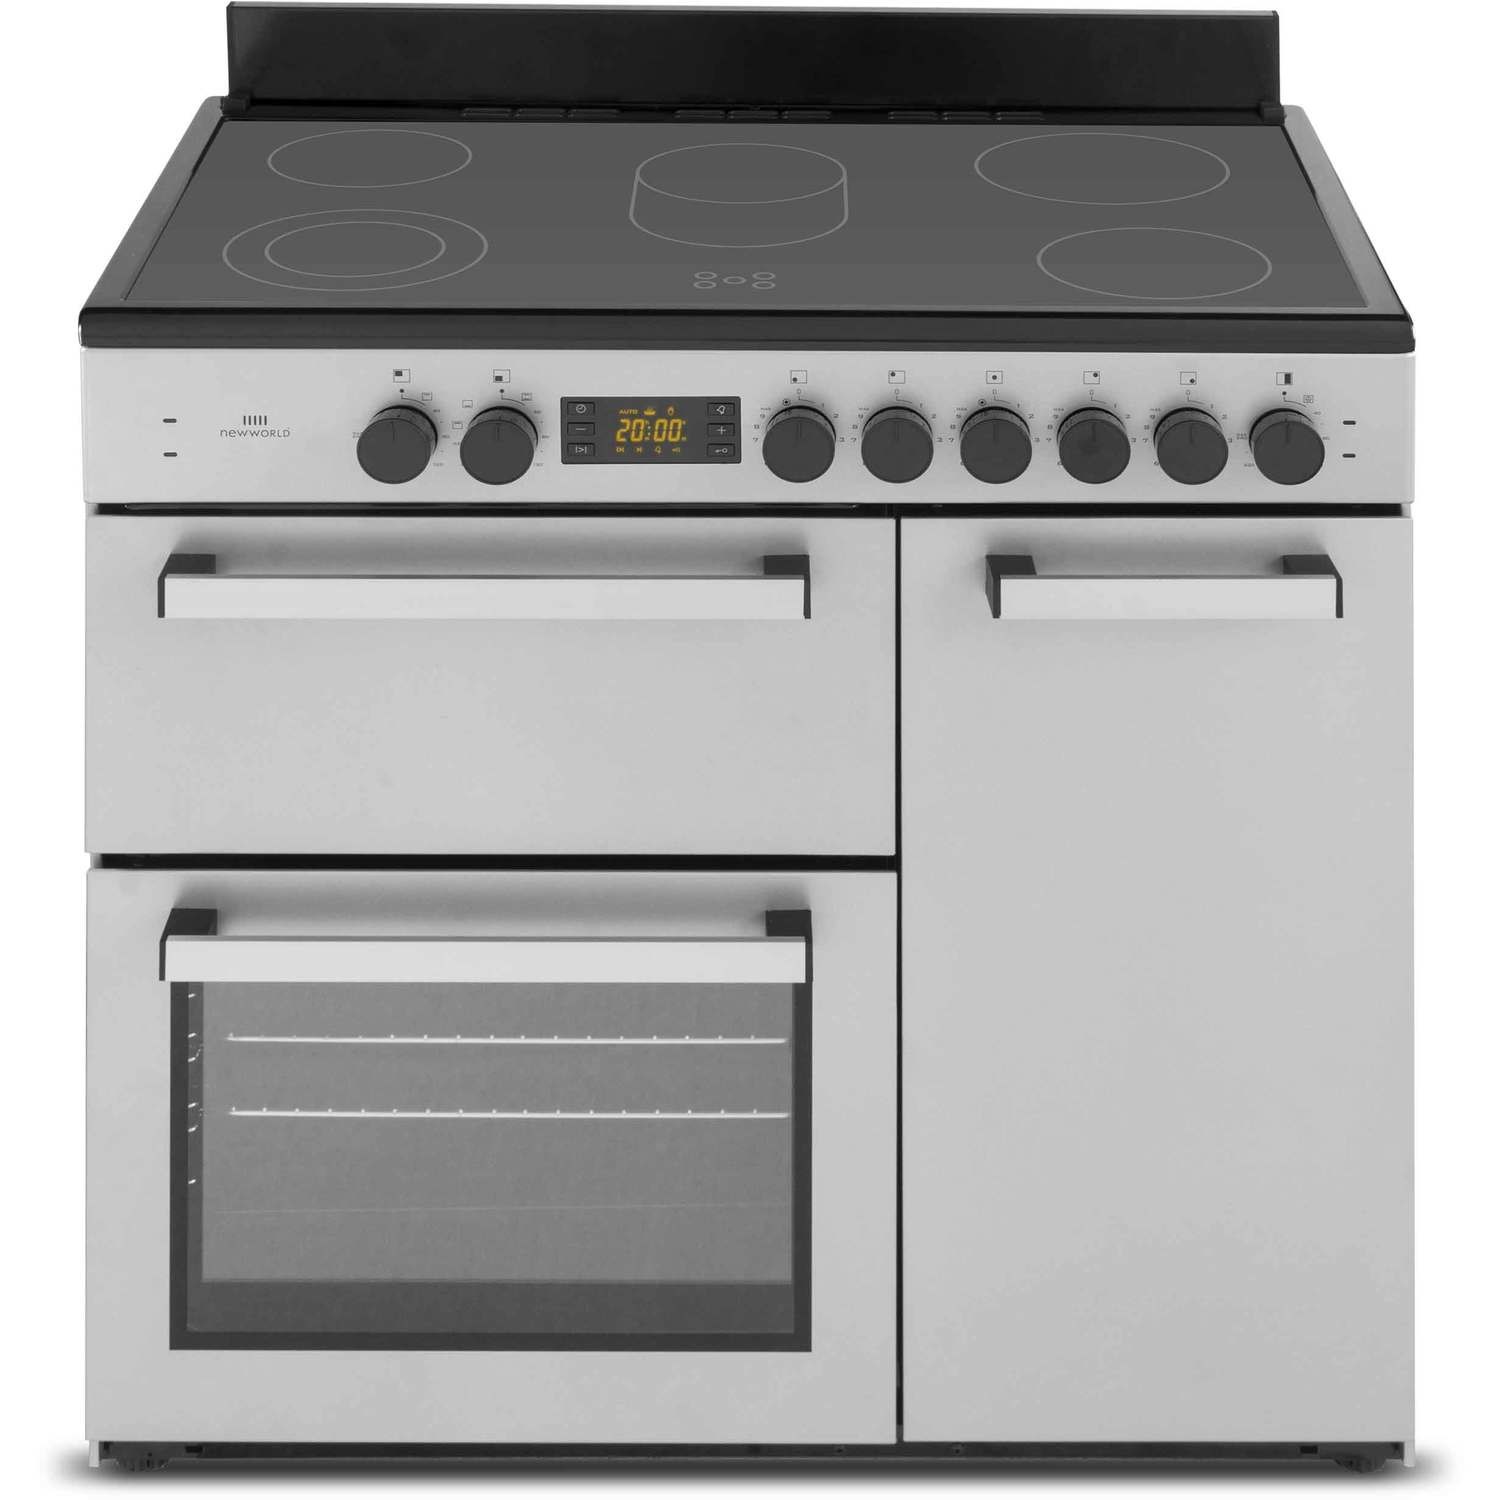 Refurbished New World NW90C3ST 90cm Electric Range Cooker with Ceramic Hob Stainless Steel